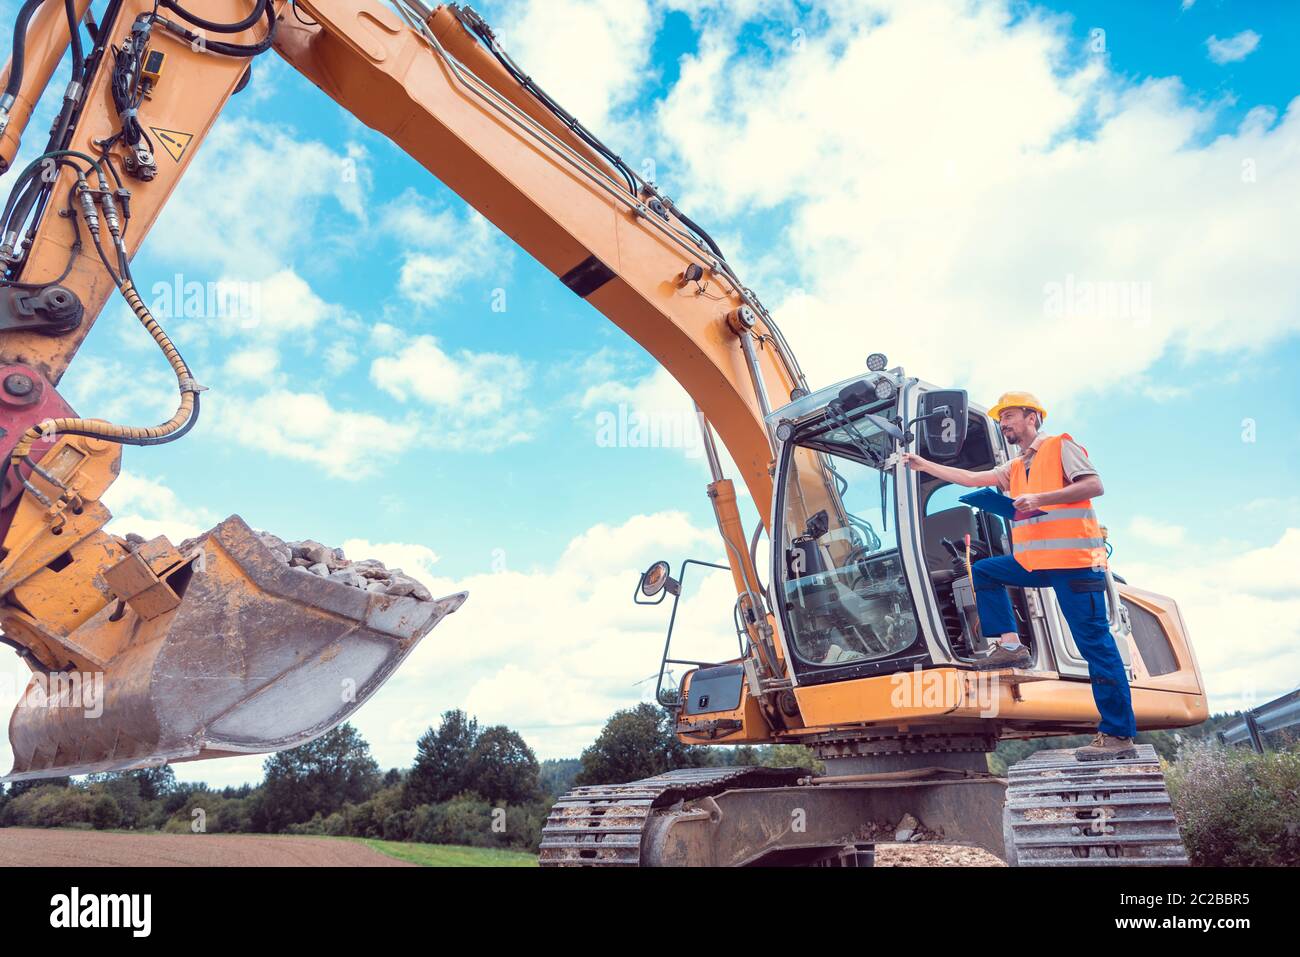 Construction worker on excavator planning the work to be done on the site Stock Photo